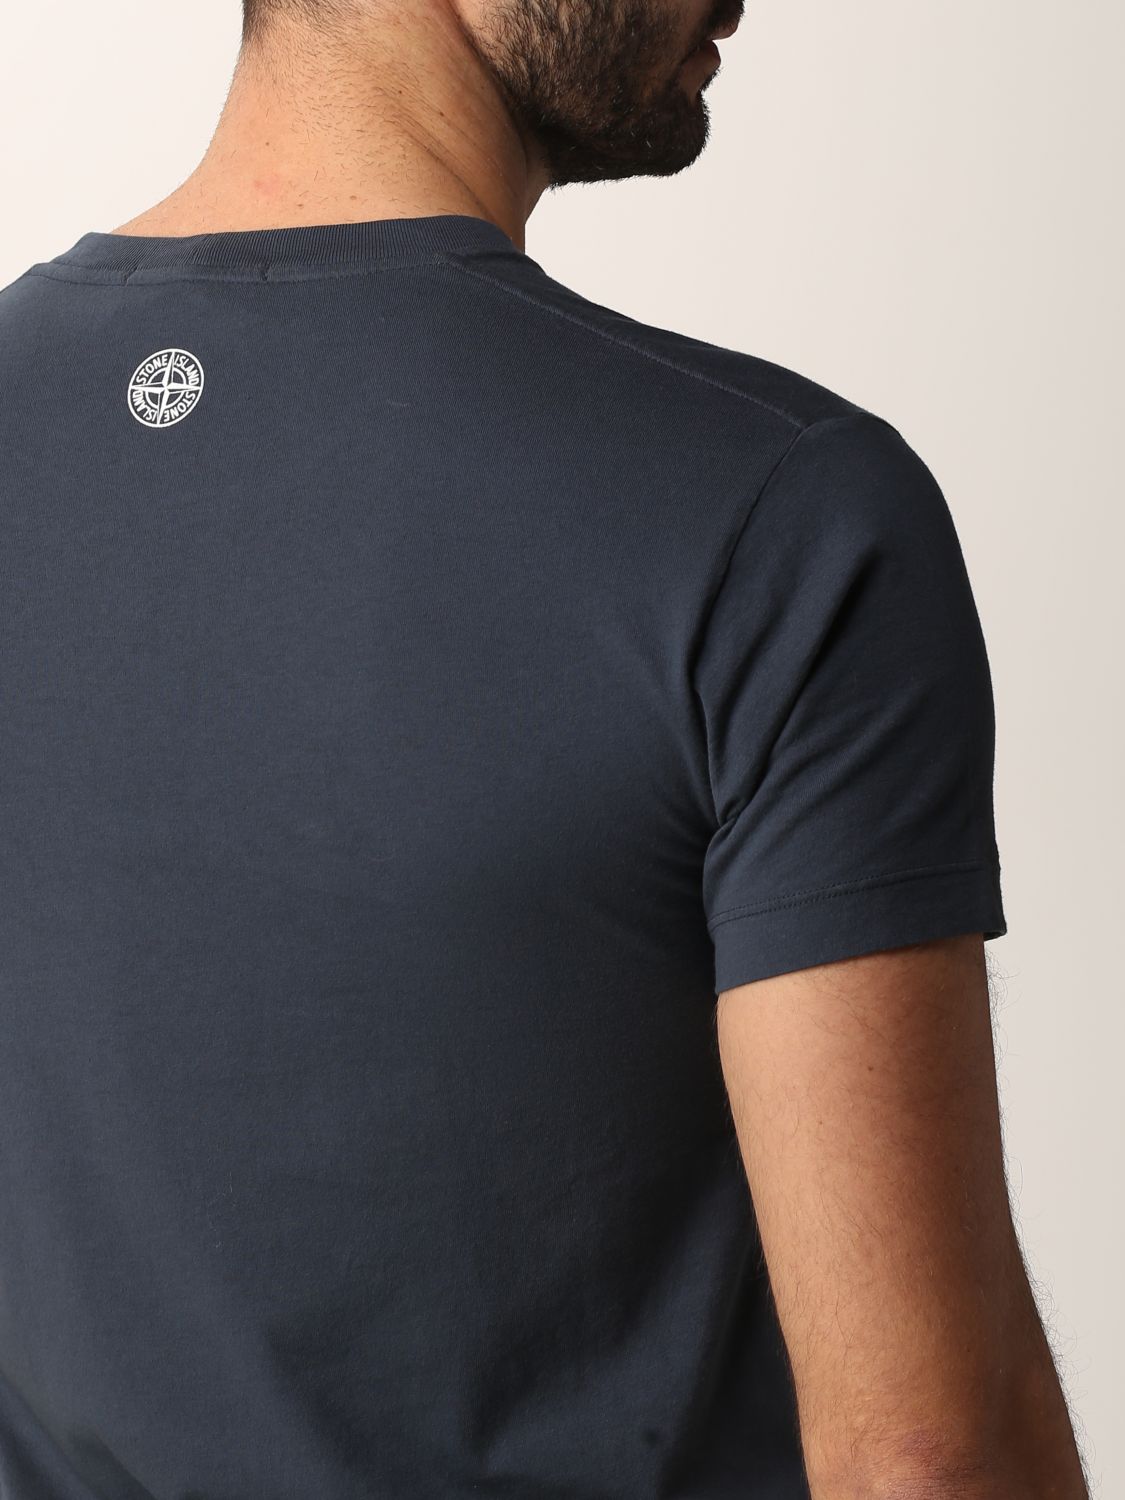 Stone Island T-shirt in cotton jersey